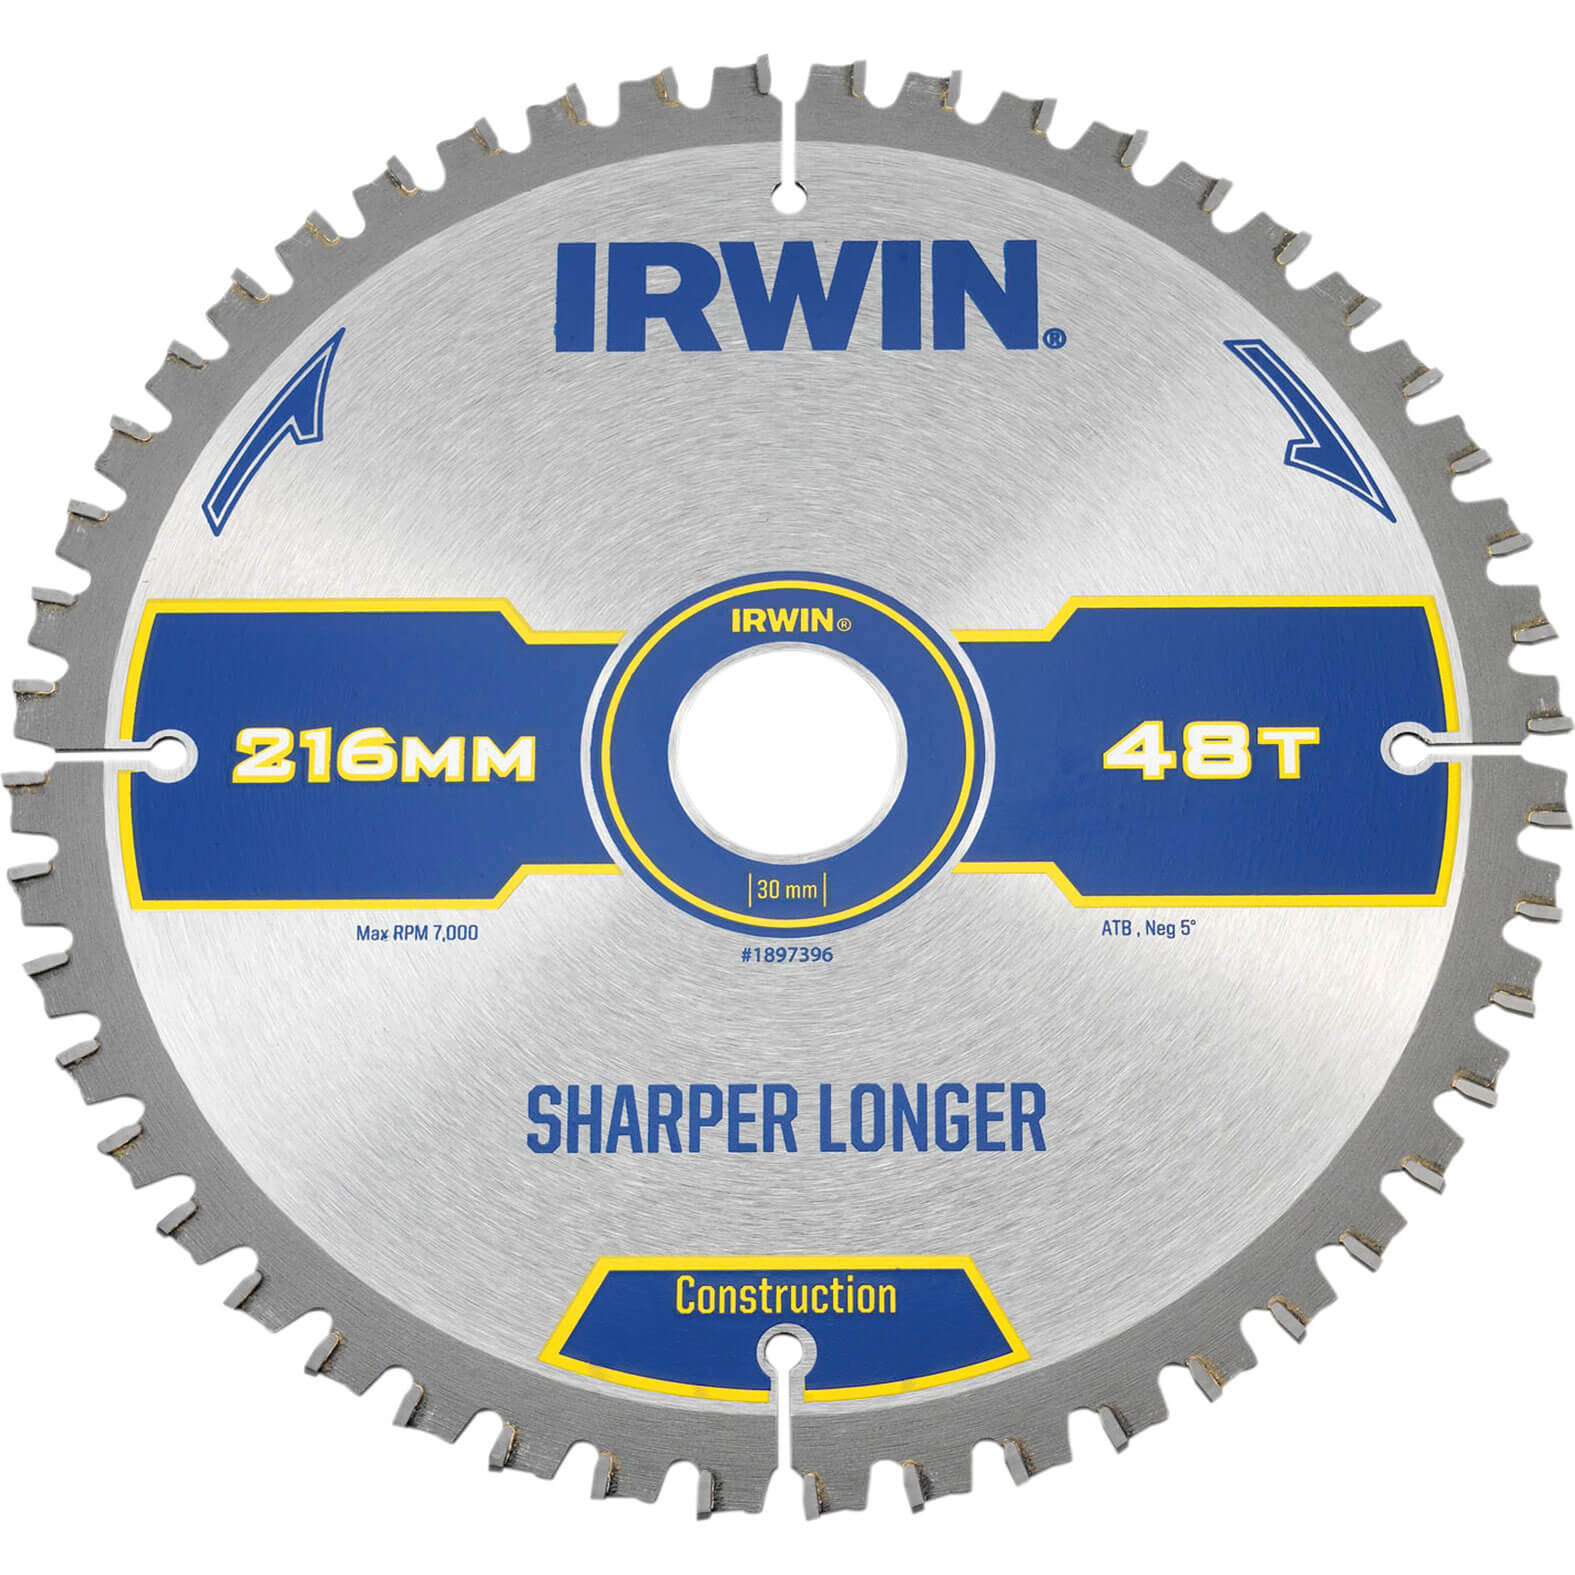 Image of Irwin ATB Ultra Construction Circular Saw Blade 216mm 48T 30mm